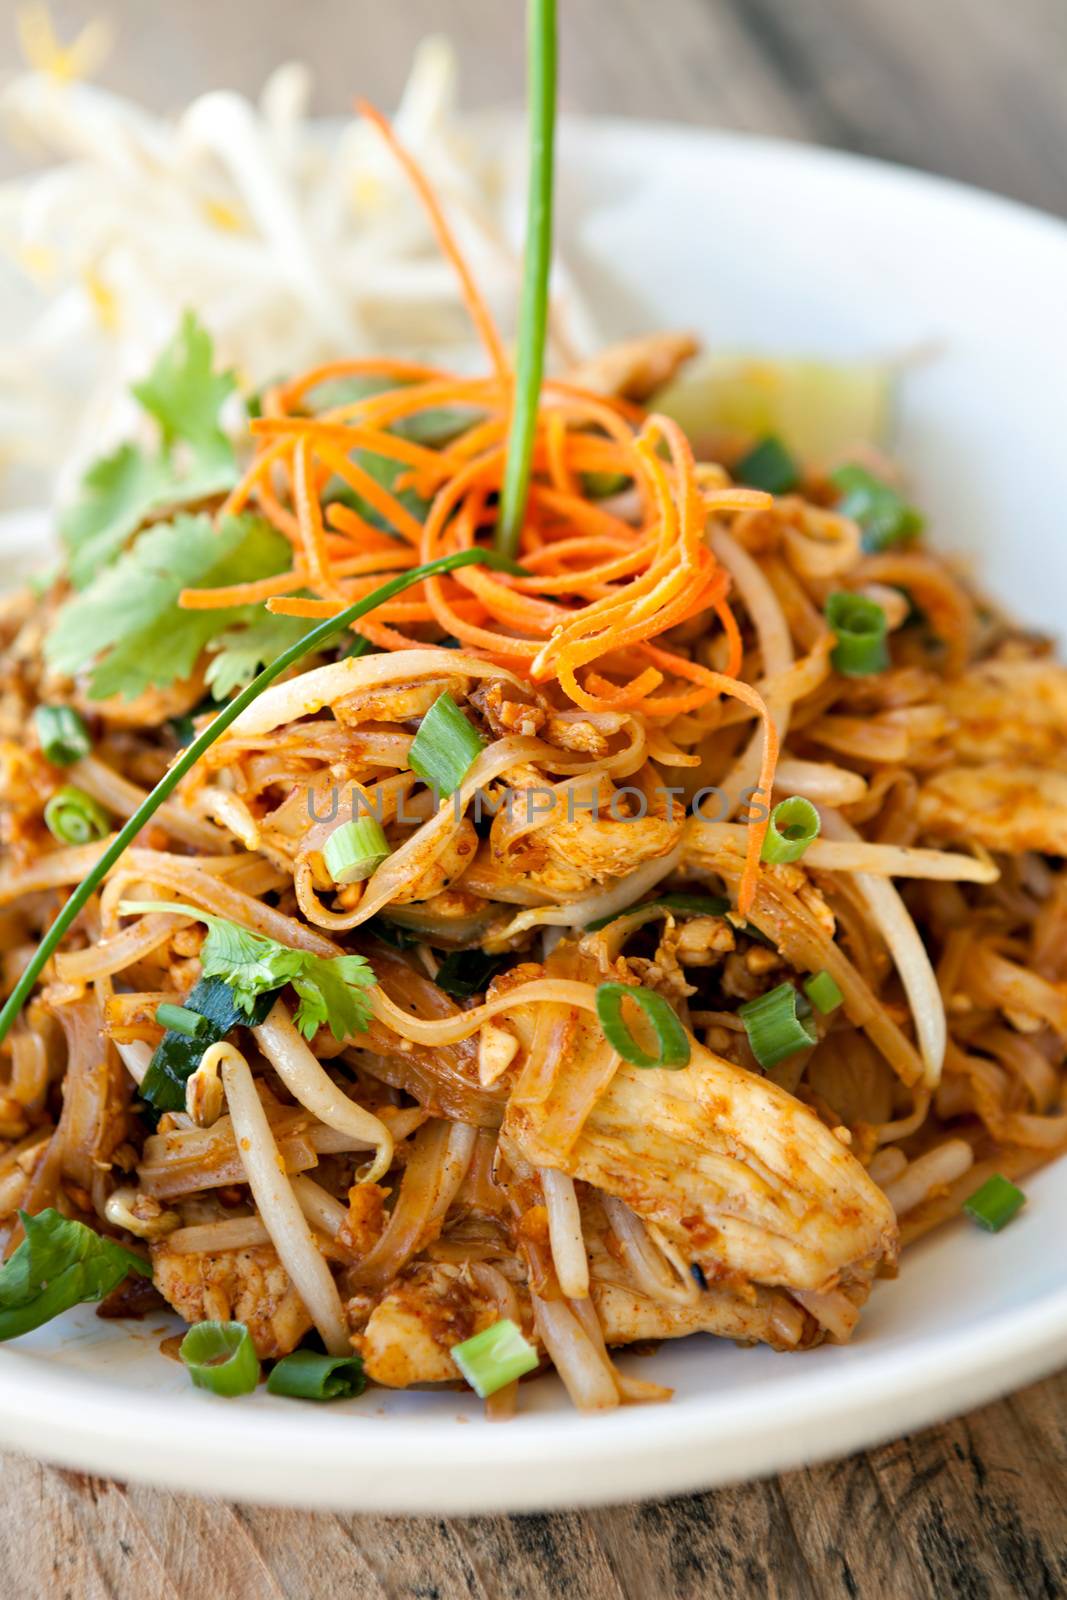 Chicken pad Thai dish of stir fried rice noodles with a contemporary presentation.